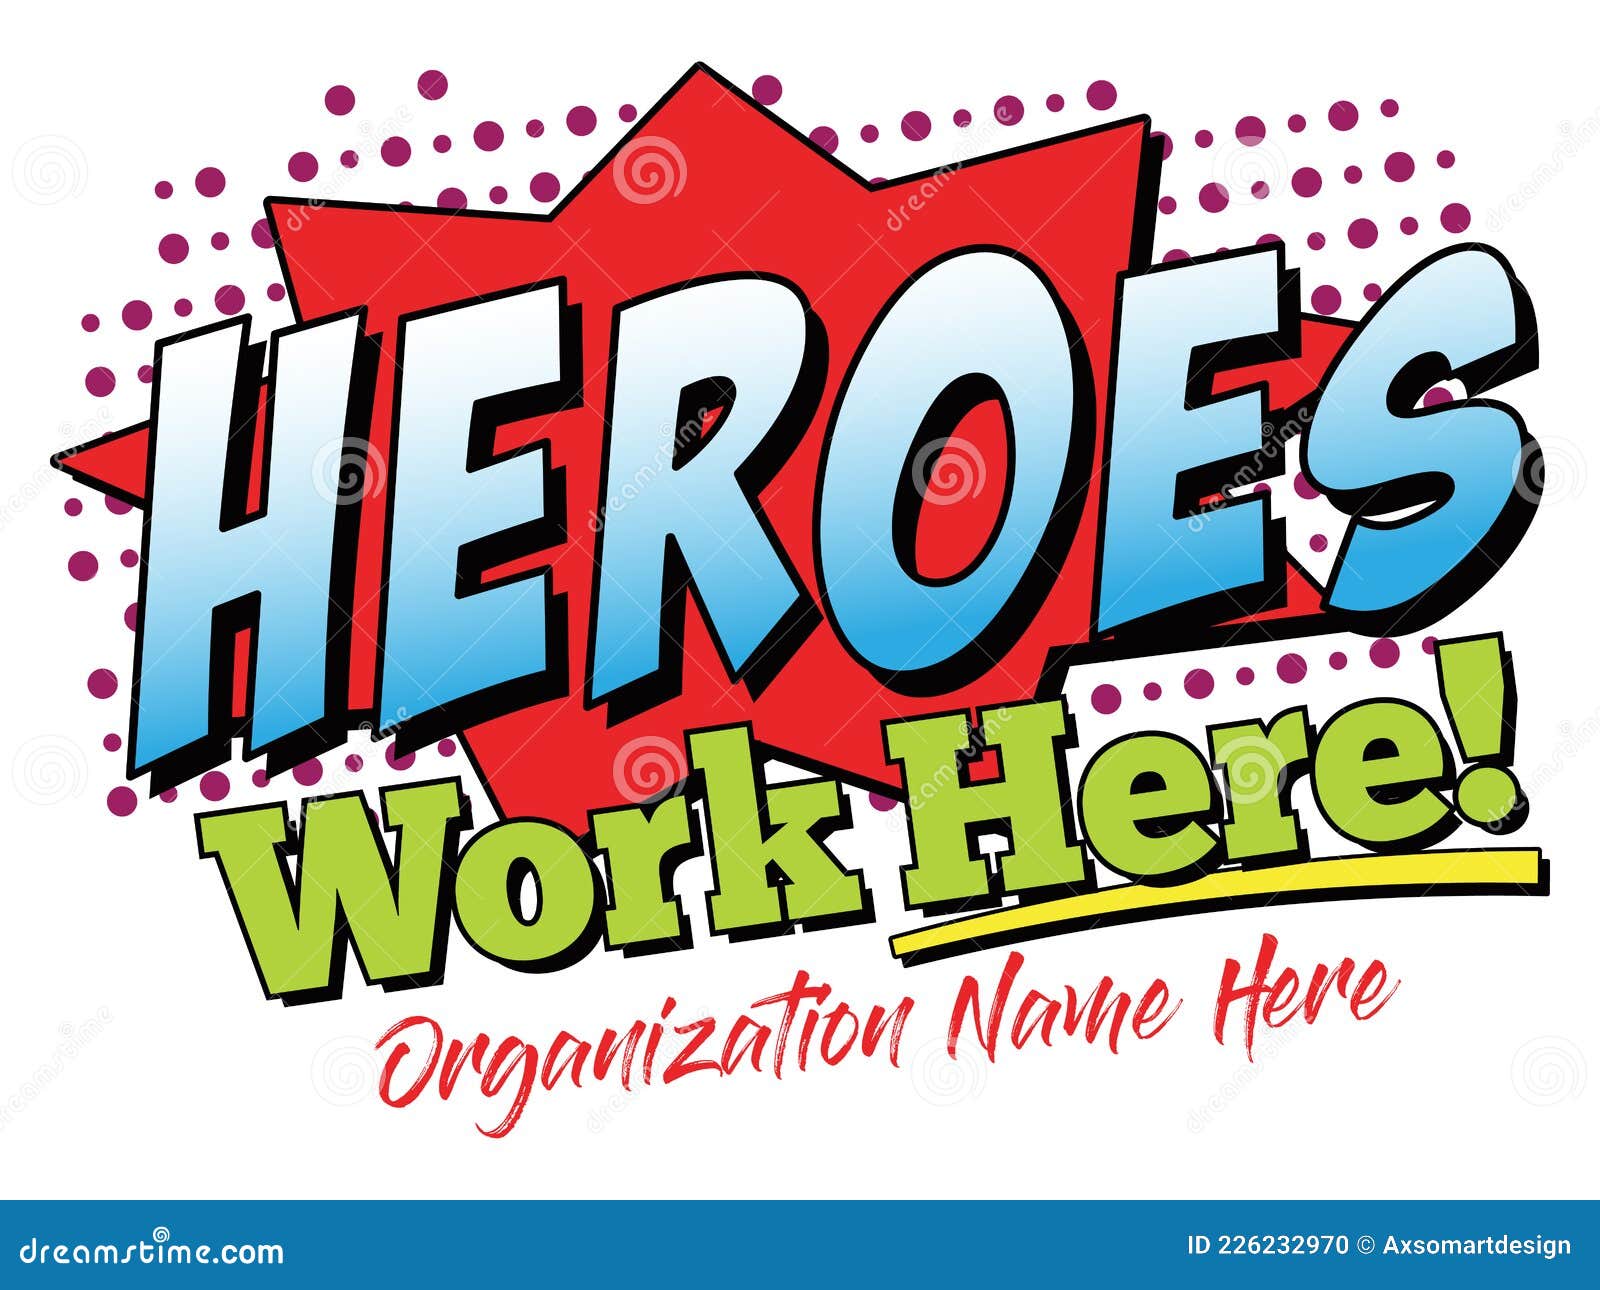 heroes work here t-shirt template | customizable tee or sign layout for your organization |  employee appreciation 